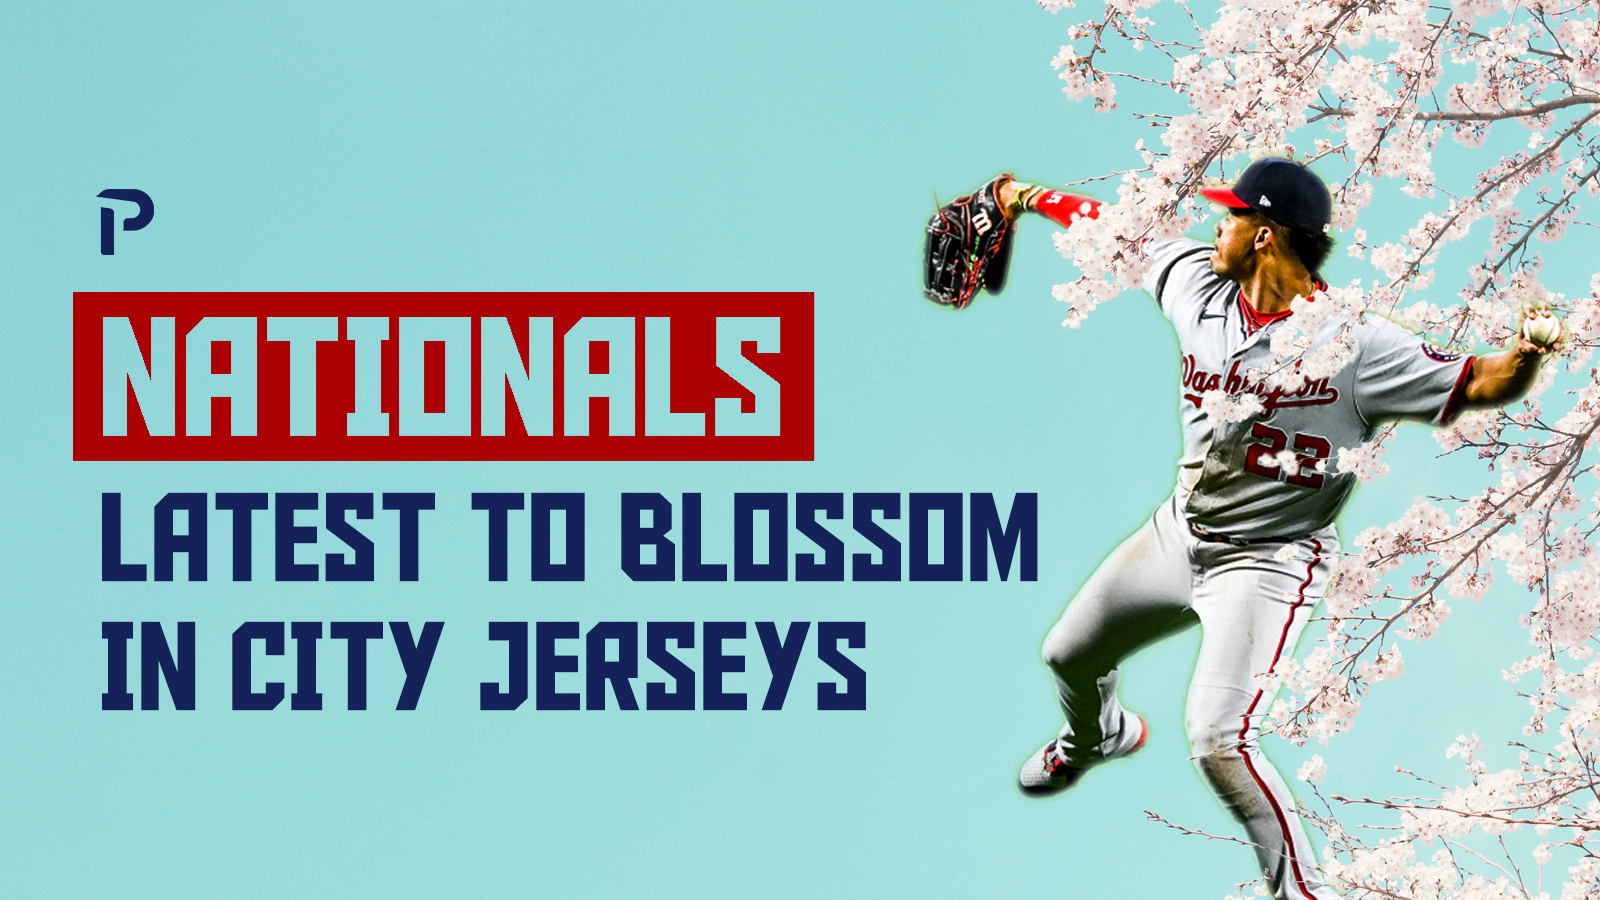 Nationals' latest to Blossom in City Jerseys